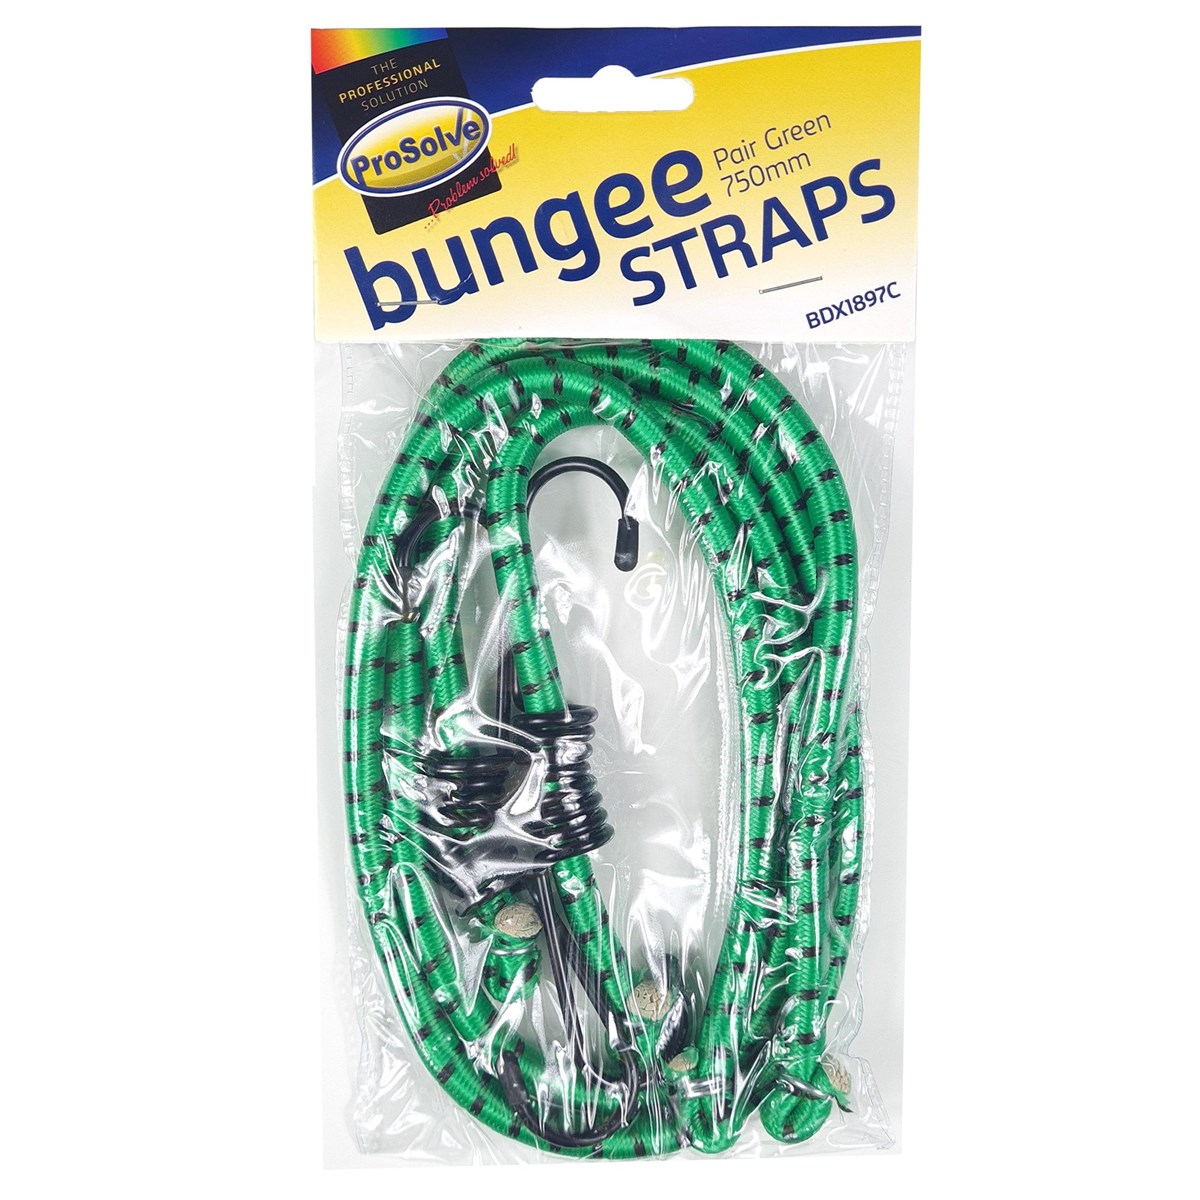 750mm Bungee Strap, Green (Twin Pack)